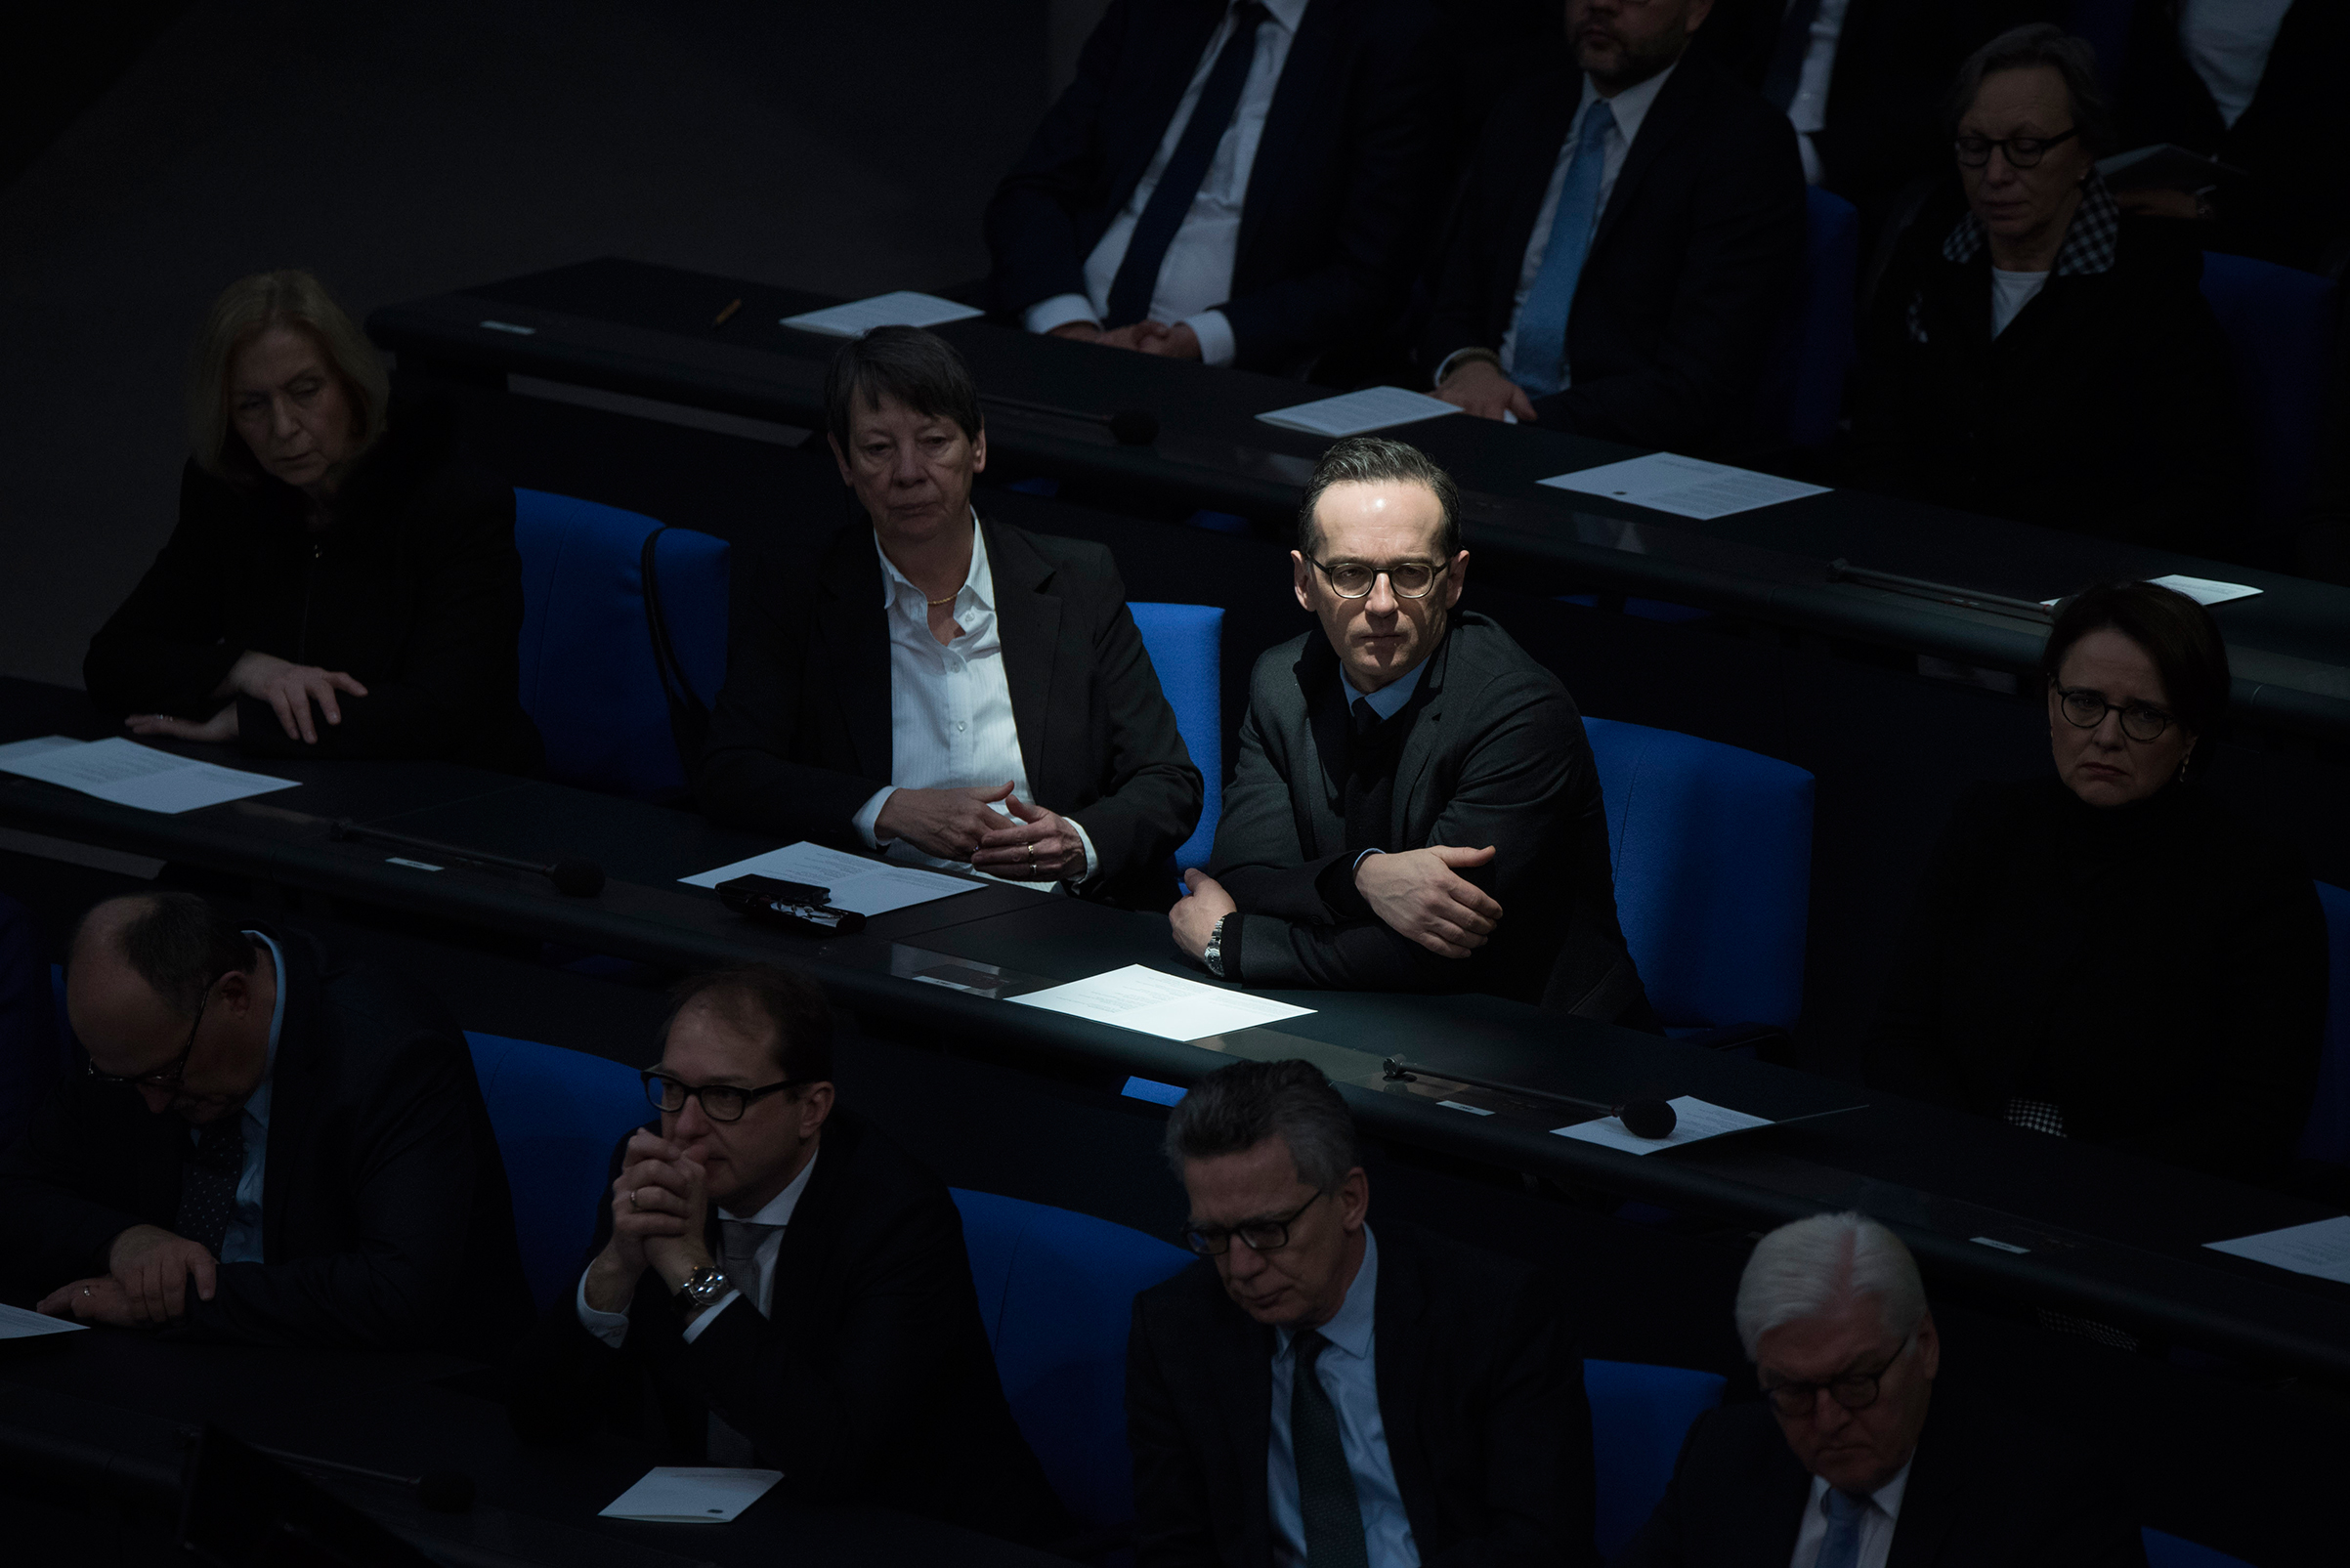 Heiko Maas, Germany's Federal Minister of Justice, during a meeting in Berlin on Jan. 27. (Hans Christian Plambeck—laif/Redux)